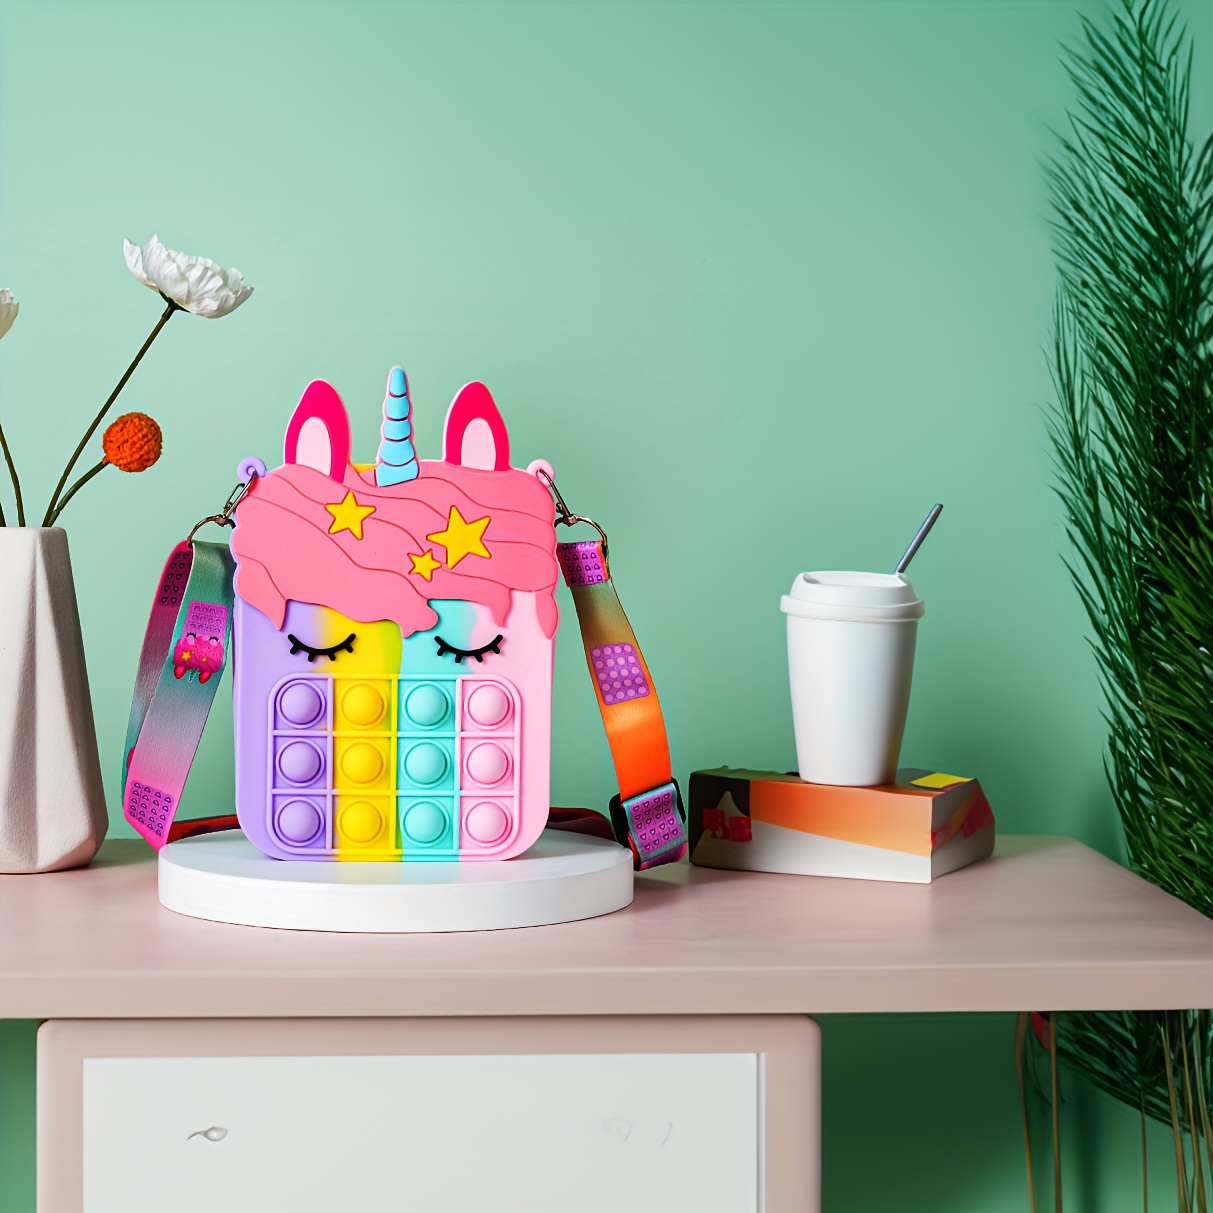 Back-to-school gifts for kids: Cute school supplies and fidget toys